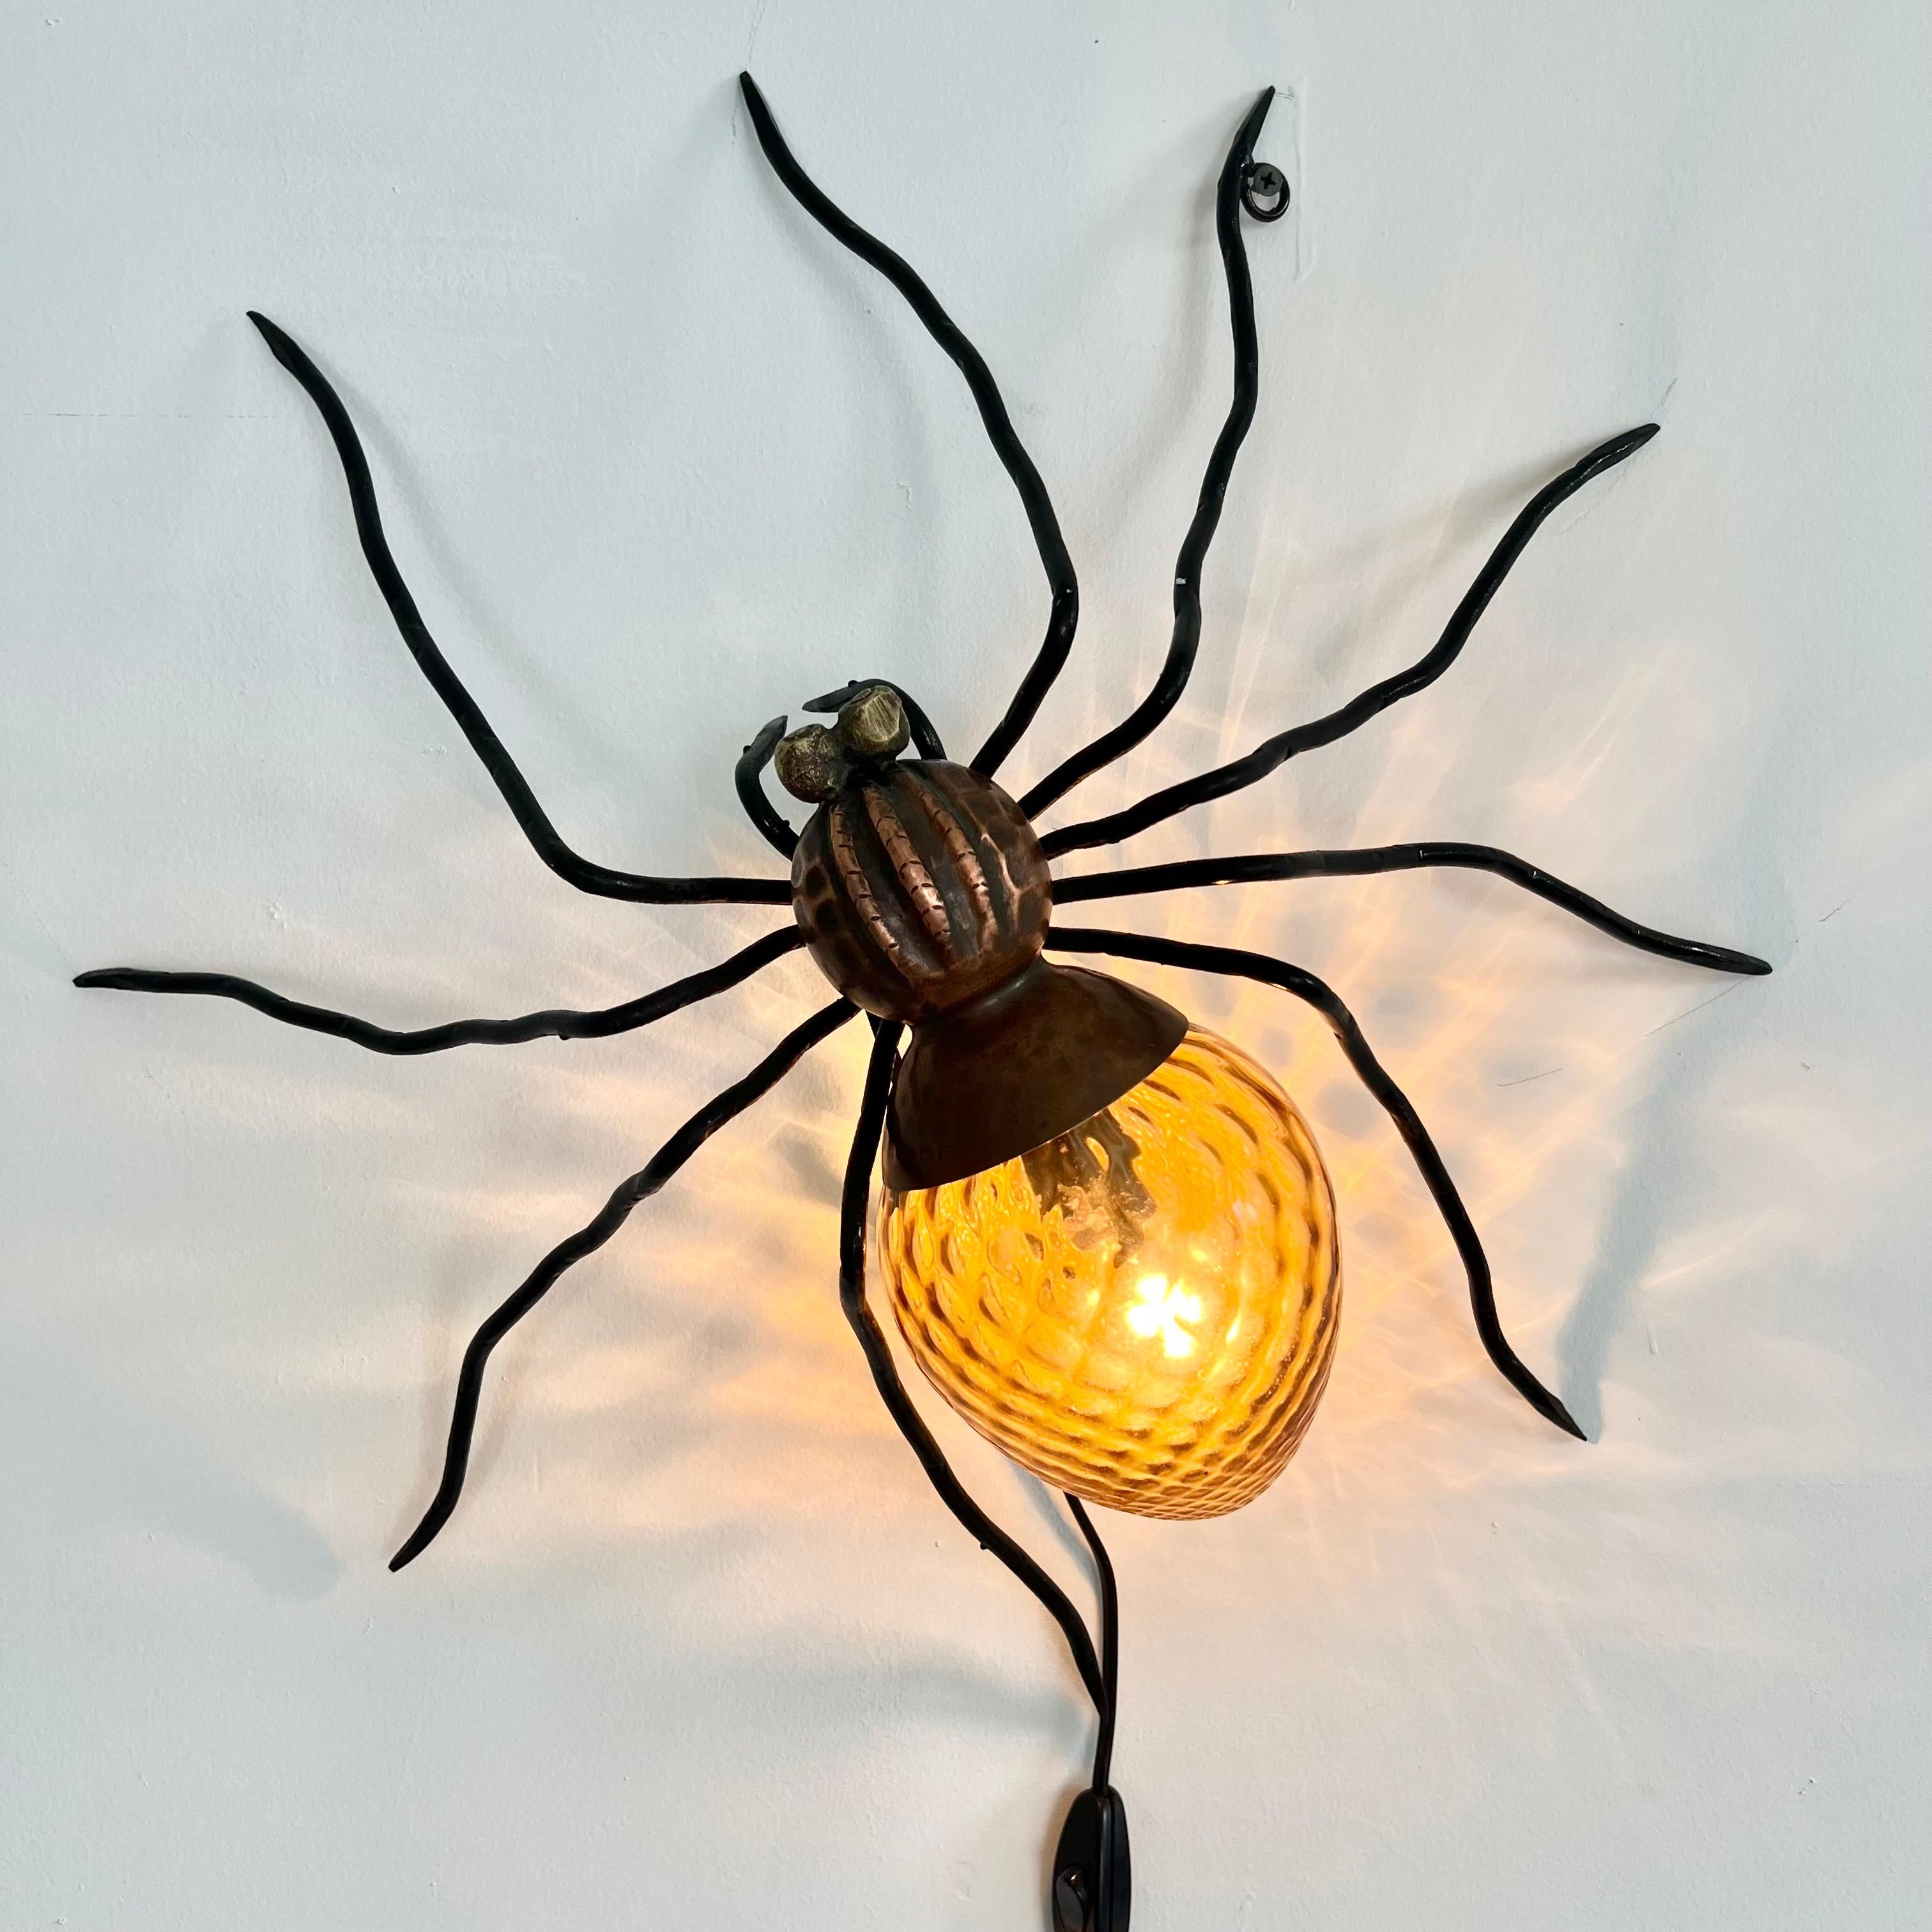 Unique copper and metal spider sconce handmade in Italy. Great presence and detail. Hammered copper body with black head and slender long legs. The abdomen is a beautiful amber glass globe with a honeycomb design. Eye catching lines and coloring.